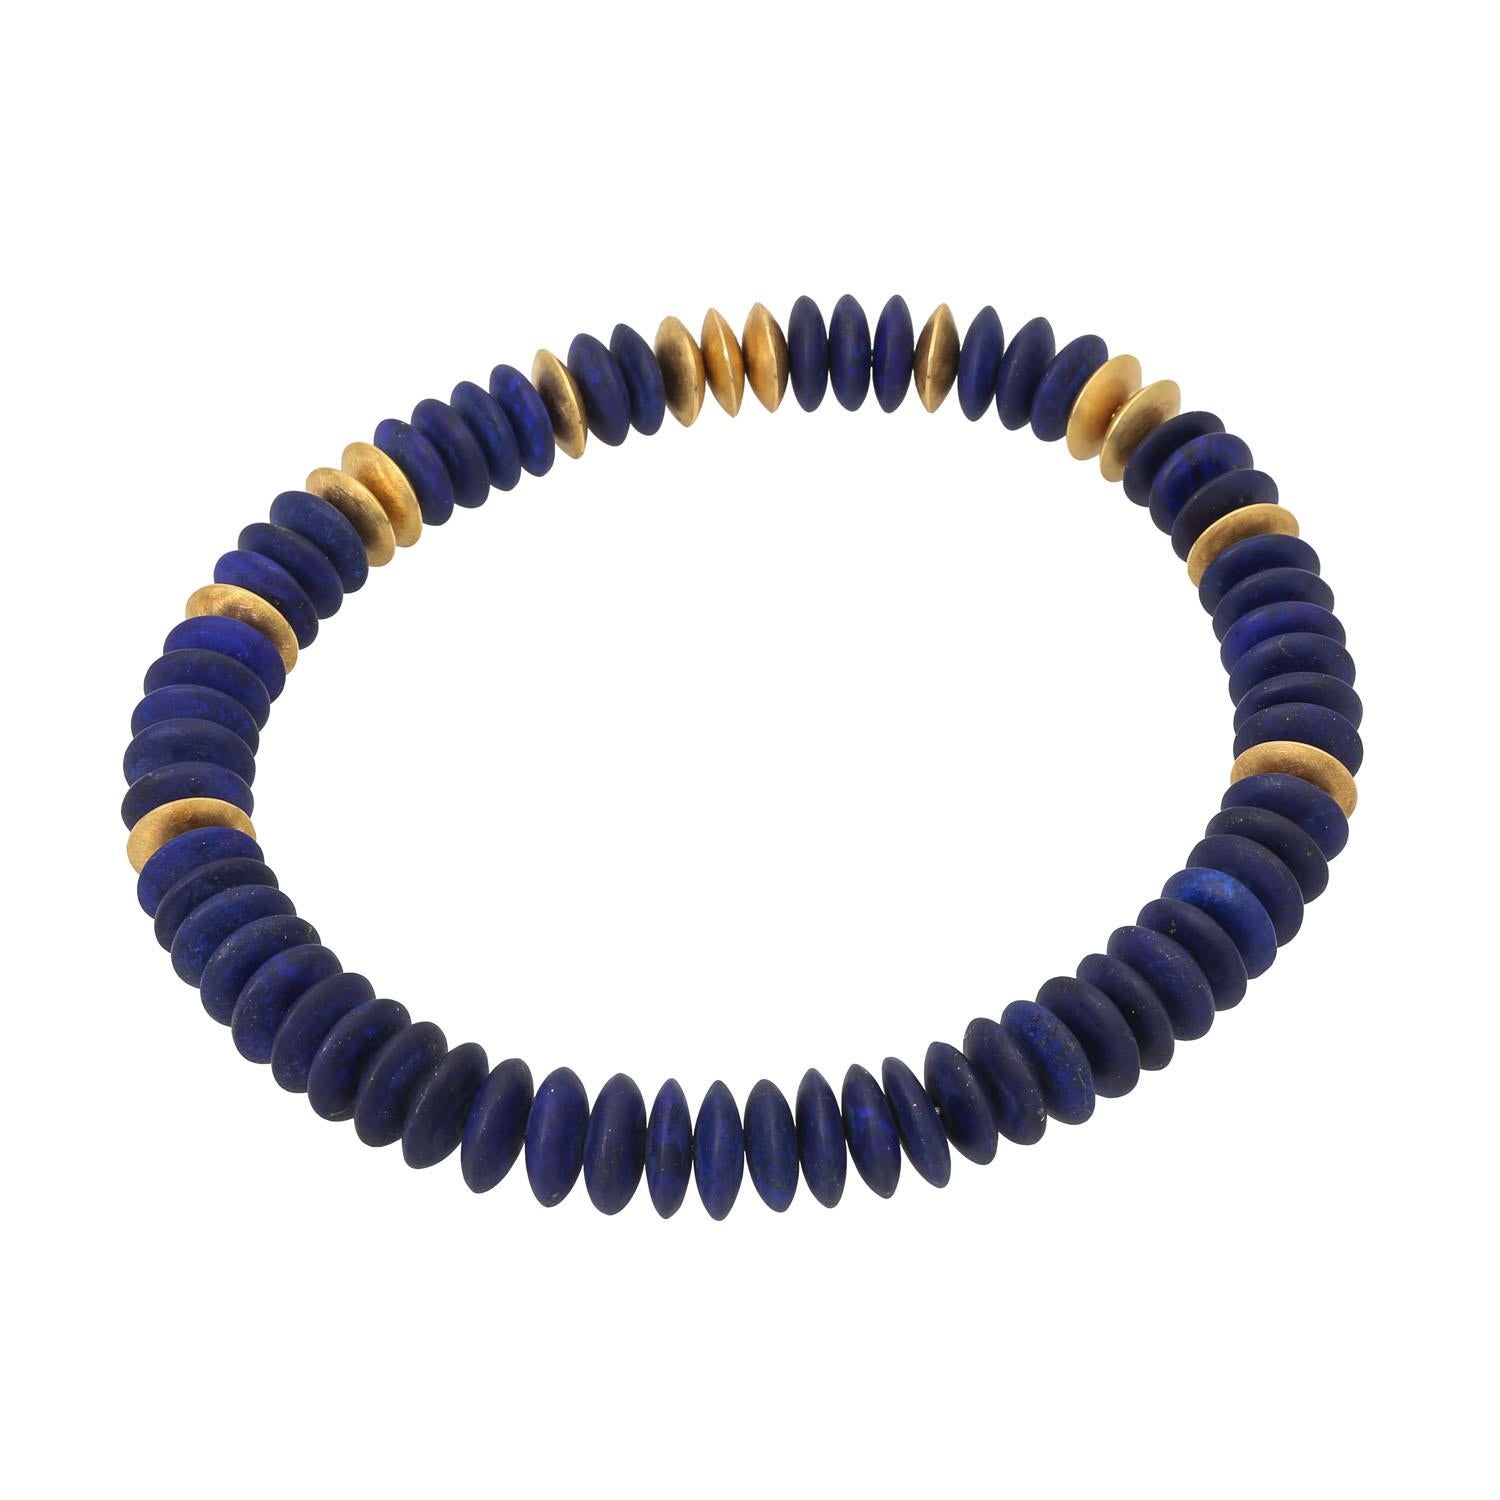 Modern Extravagant Necklace Made of Lapis Lazuli Slices For Sale